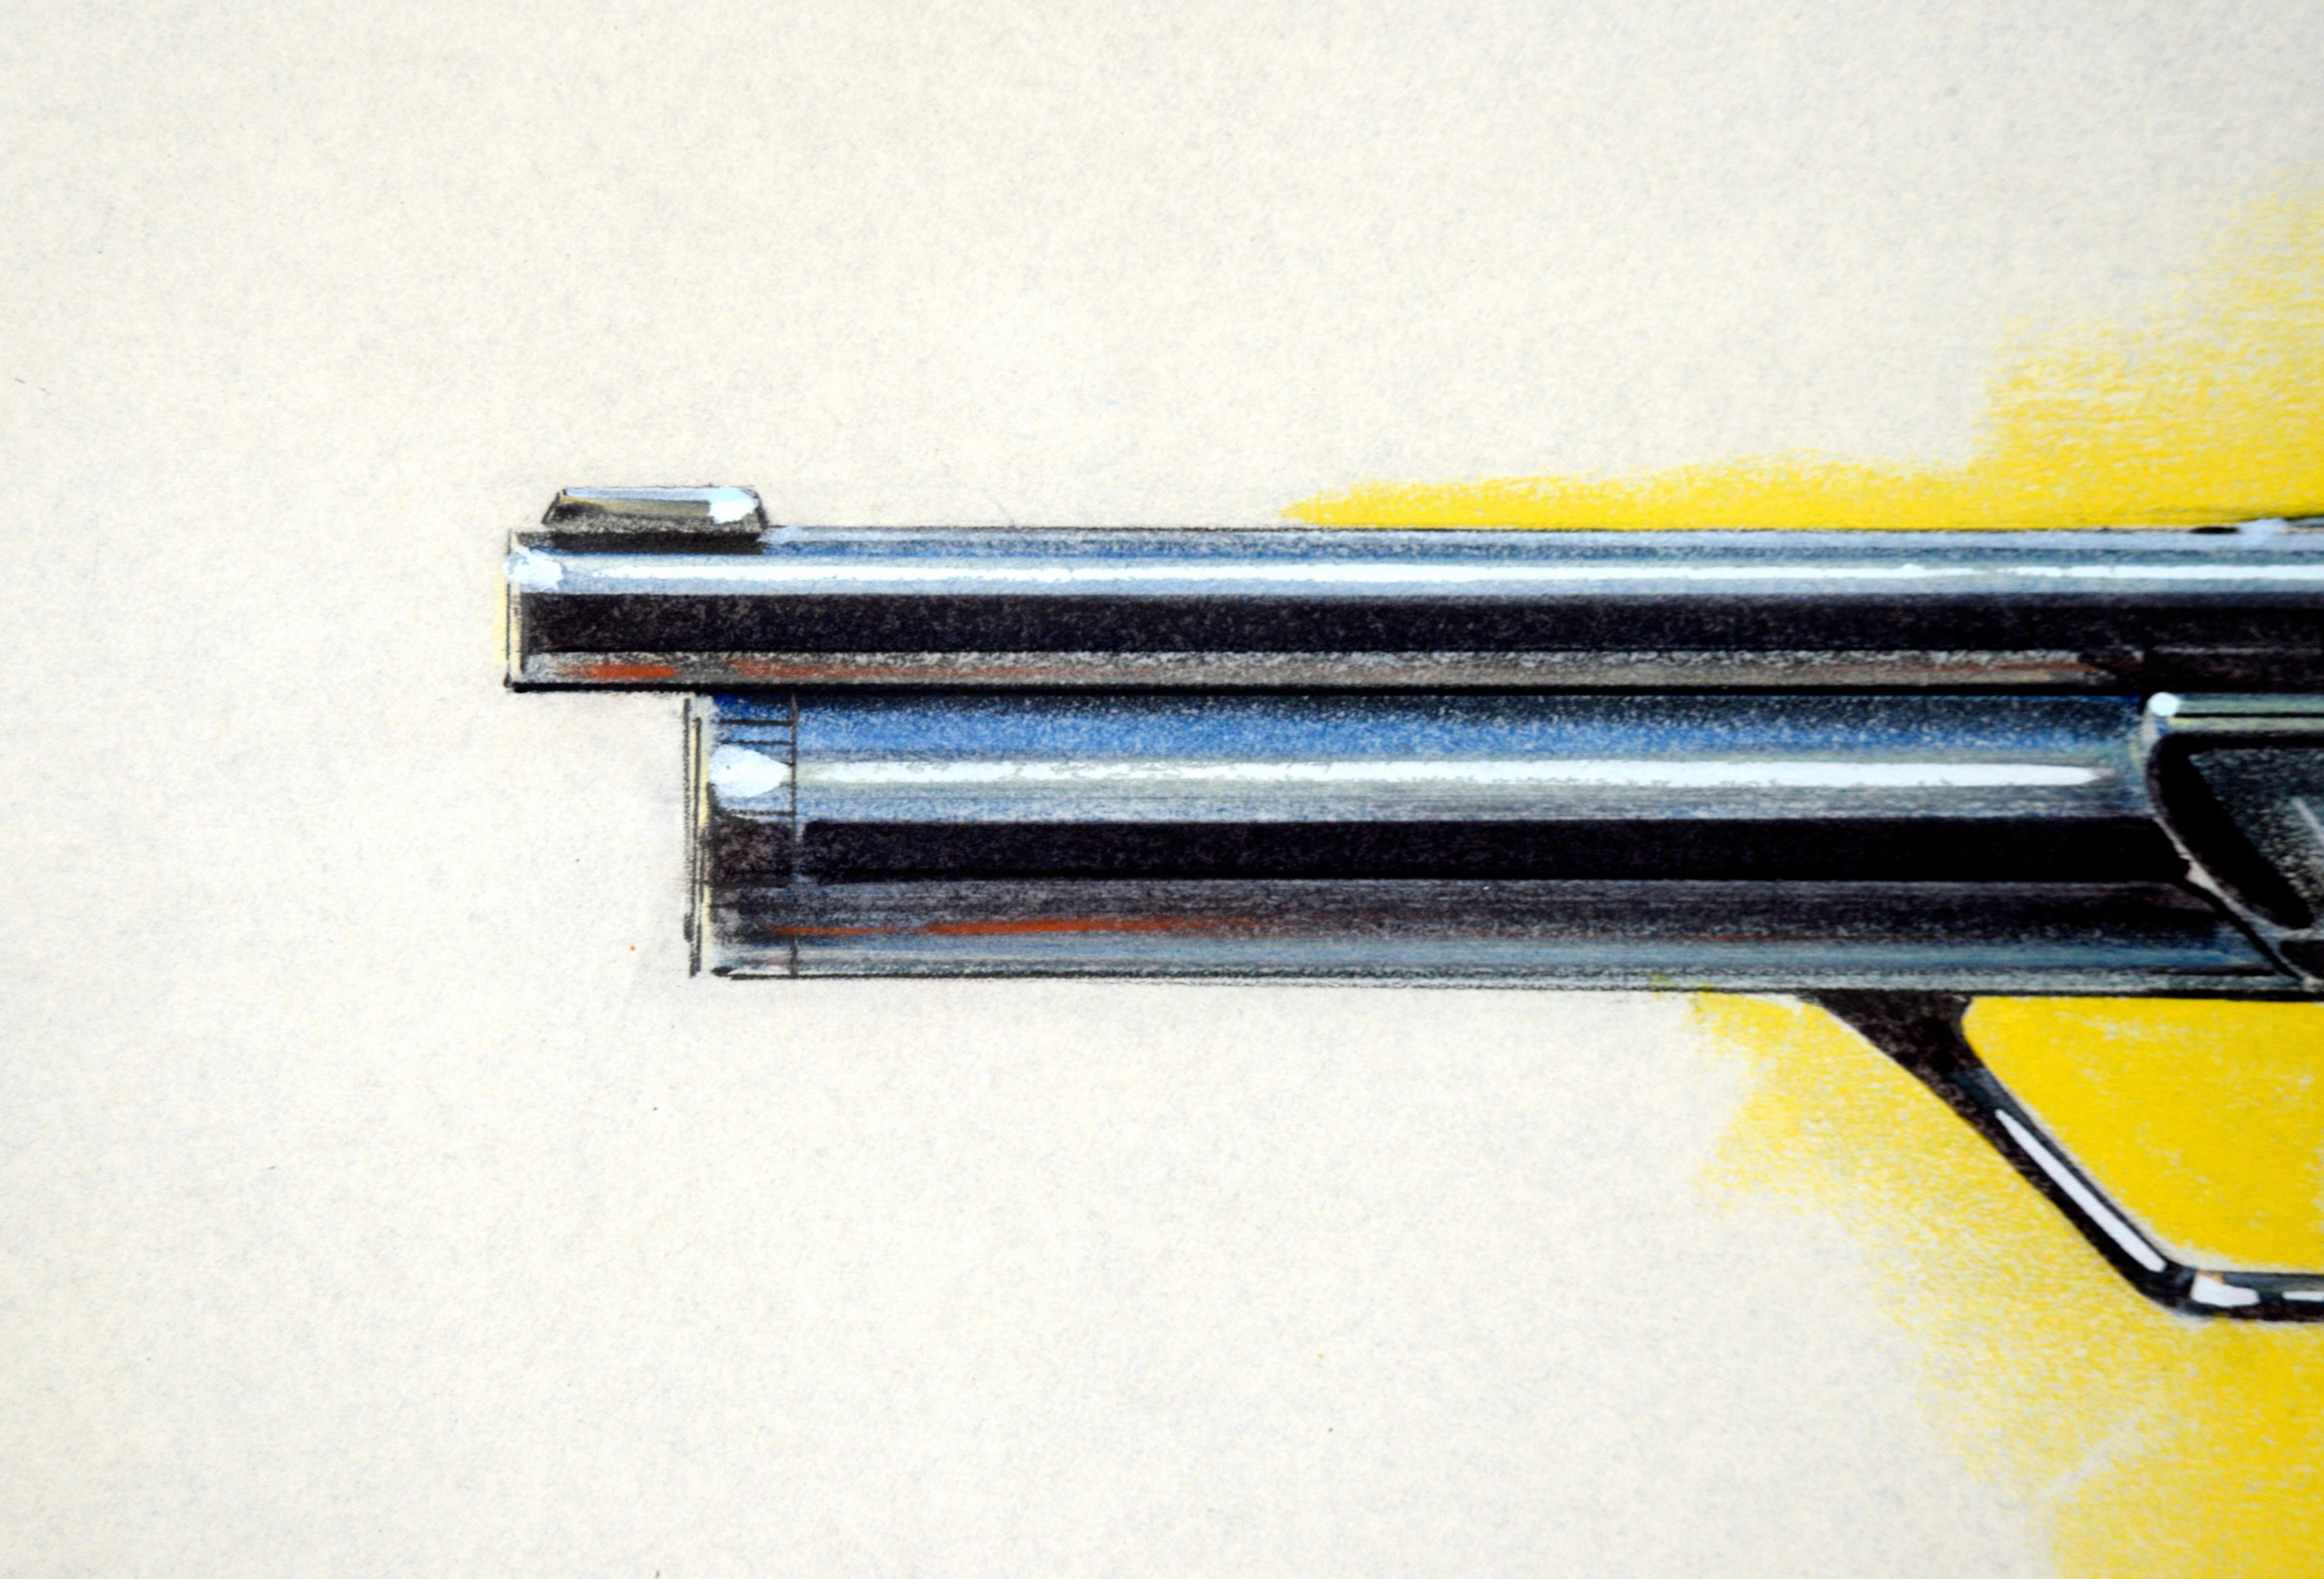 Three design-quality illustrations of Hahn (Steyr-Hahn) brand Air Pellet Pistols by Edward T. Liljenwall (American, 1943-2010). Each pistol is expertly rendered, with smooth shading and specific details. Proto-type design of a Hahn co2 Pellgun